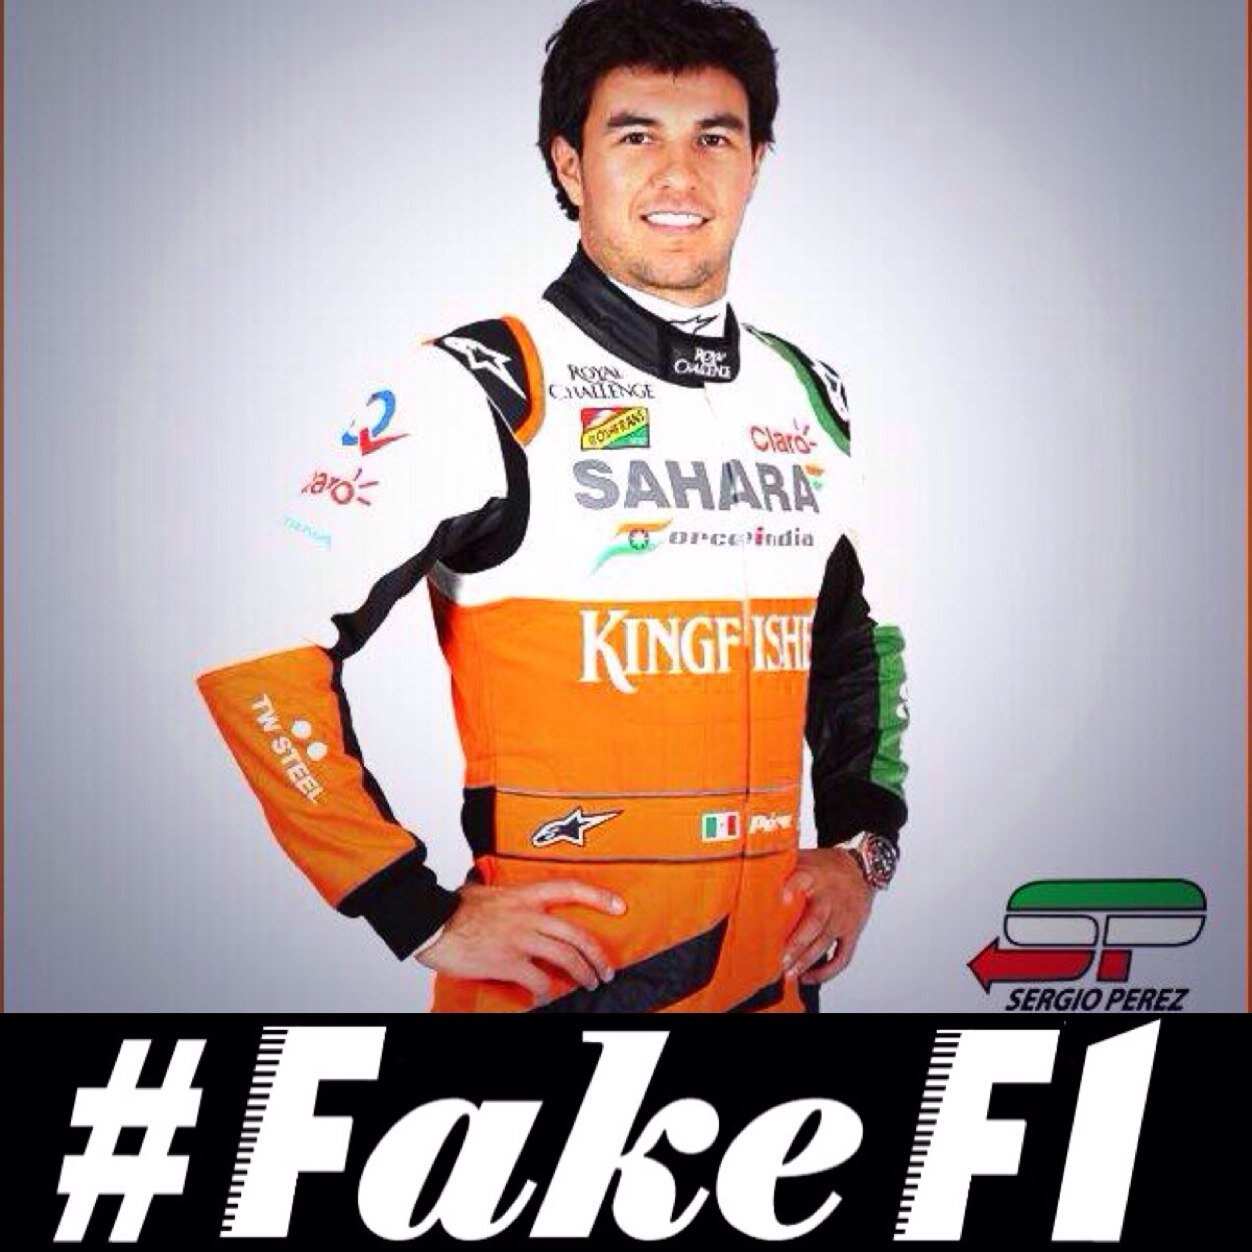 For sure, I am (fake/falso) Checo Perez. I drive in Orange and Green because it like flag of Mexico! #NeverGiveUp Winner of FakeF1 Special Award 2013!